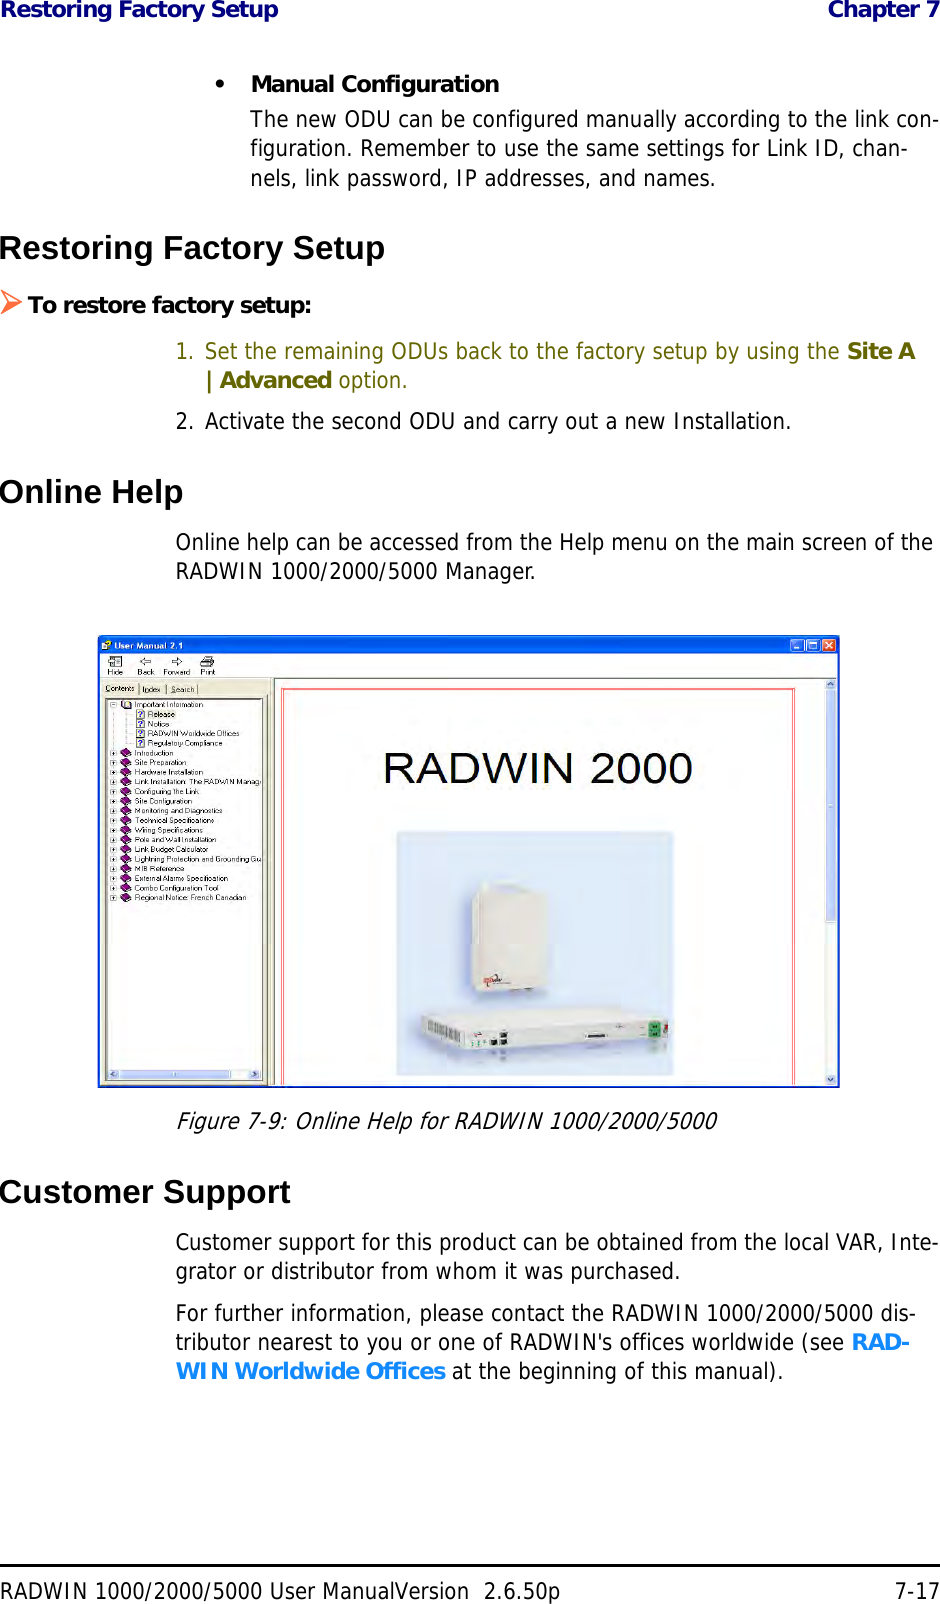 Restoring Factory Setup  Chapter 7RADWIN 1000/2000/5000 User ManualVersion  2.6.50p 7-17• Manual ConfigurationThe new ODU can be configured manually according to the link con-figuration. Remember to use the same settings for Link ID, chan-nels, link password, IP addresses, and names. Restoring Factory SetupTo restore factory setup:1. Set the remaining ODUs back to the factory setup by using the Site A |Advanced option.2. Activate the second ODU and carry out a new Installation.Online HelpOnline help can be accessed from the Help menu on the main screen of the RADWIN 1000/2000/5000 Manager.Figure 7-9: Online Help for RADWIN 1000/2000/5000Customer SupportCustomer support for this product can be obtained from the local VAR, Inte-grator or distributor from whom it was purchased.For further information, please contact the RADWIN 1000/2000/5000 dis-tributor nearest to you or one of RADWIN&apos;s offices worldwide (see RAD-WIN Worldwide Offices at the beginning of this manual).